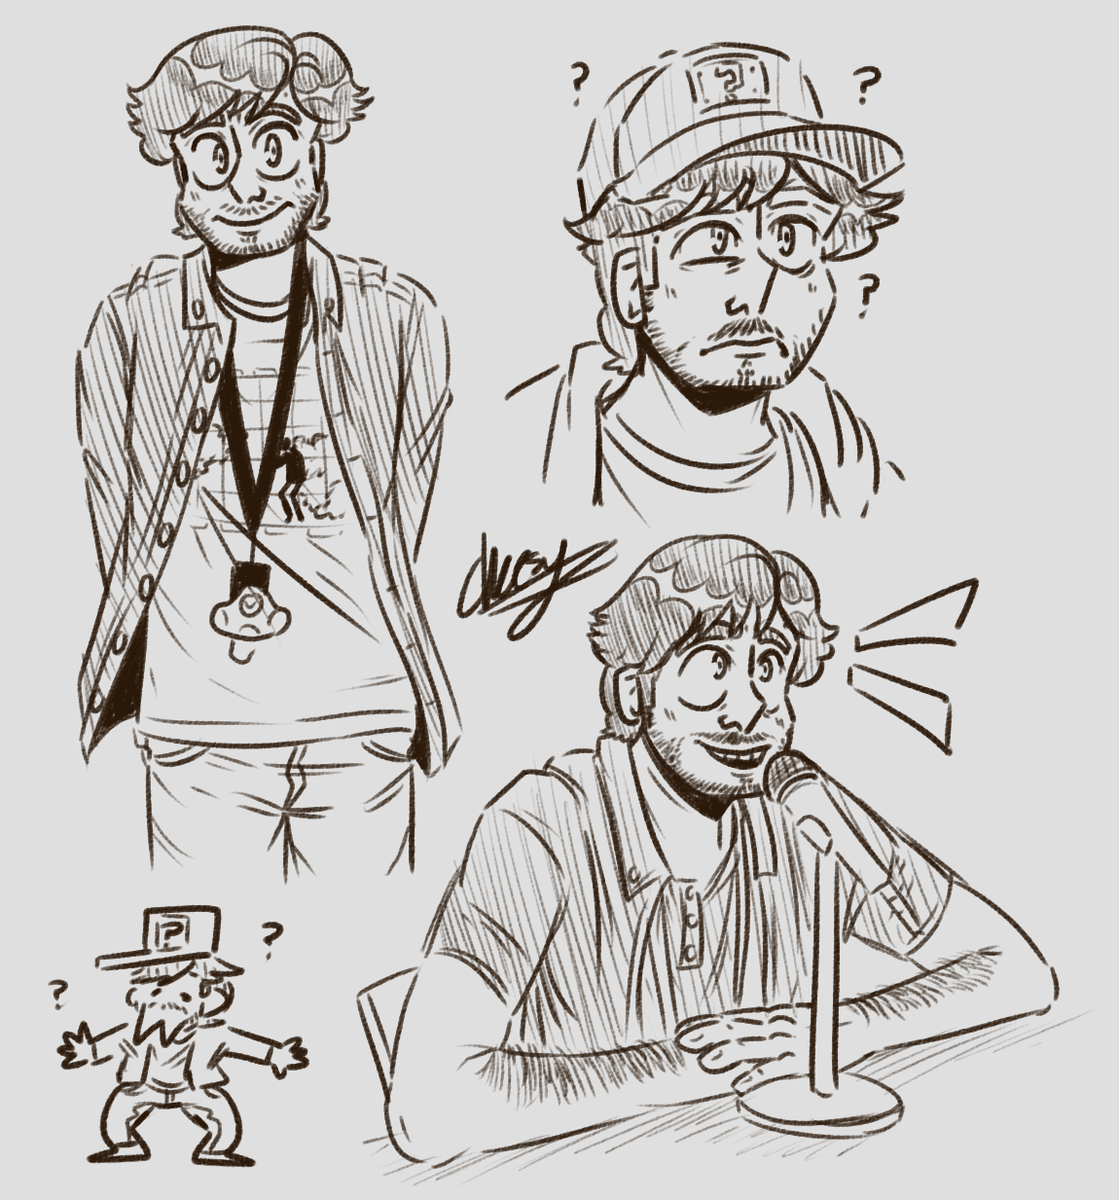 Some VC doodles. The first ones are photo studies. The second one was because @Jazz_JenArt wanted me to draw VineGasm so I put my own spin on it and referenced the video the original photo is from.

#vinesauce 